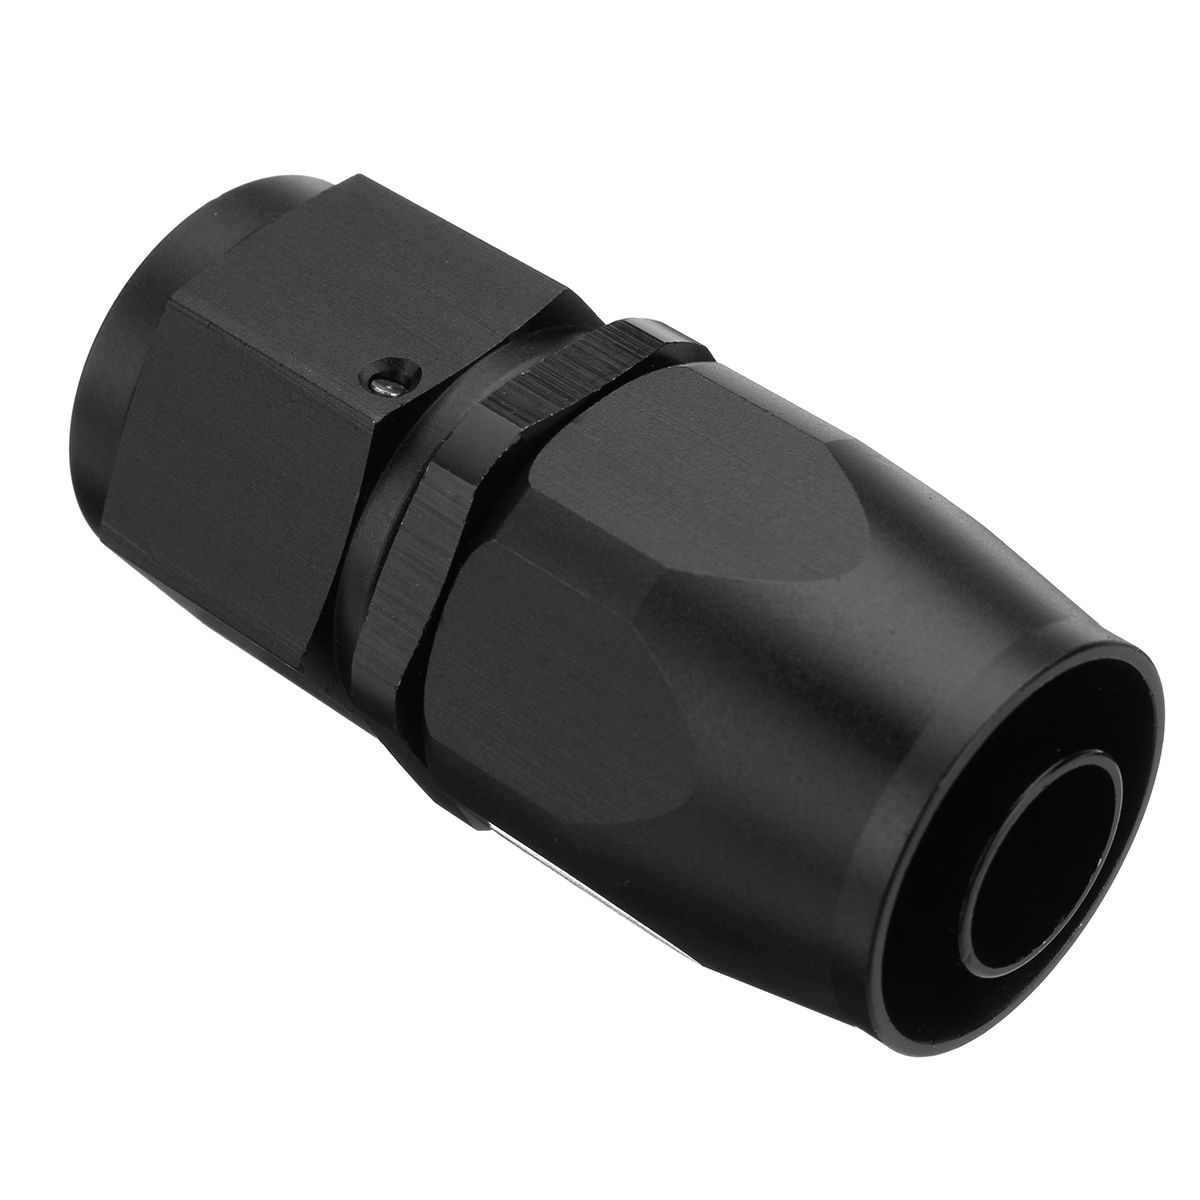 AN-10-Straight-Fast-Flow-Swivel-Seal-Oil-Fuel-Hose-End-Fitting-Adapter-Black-1223710